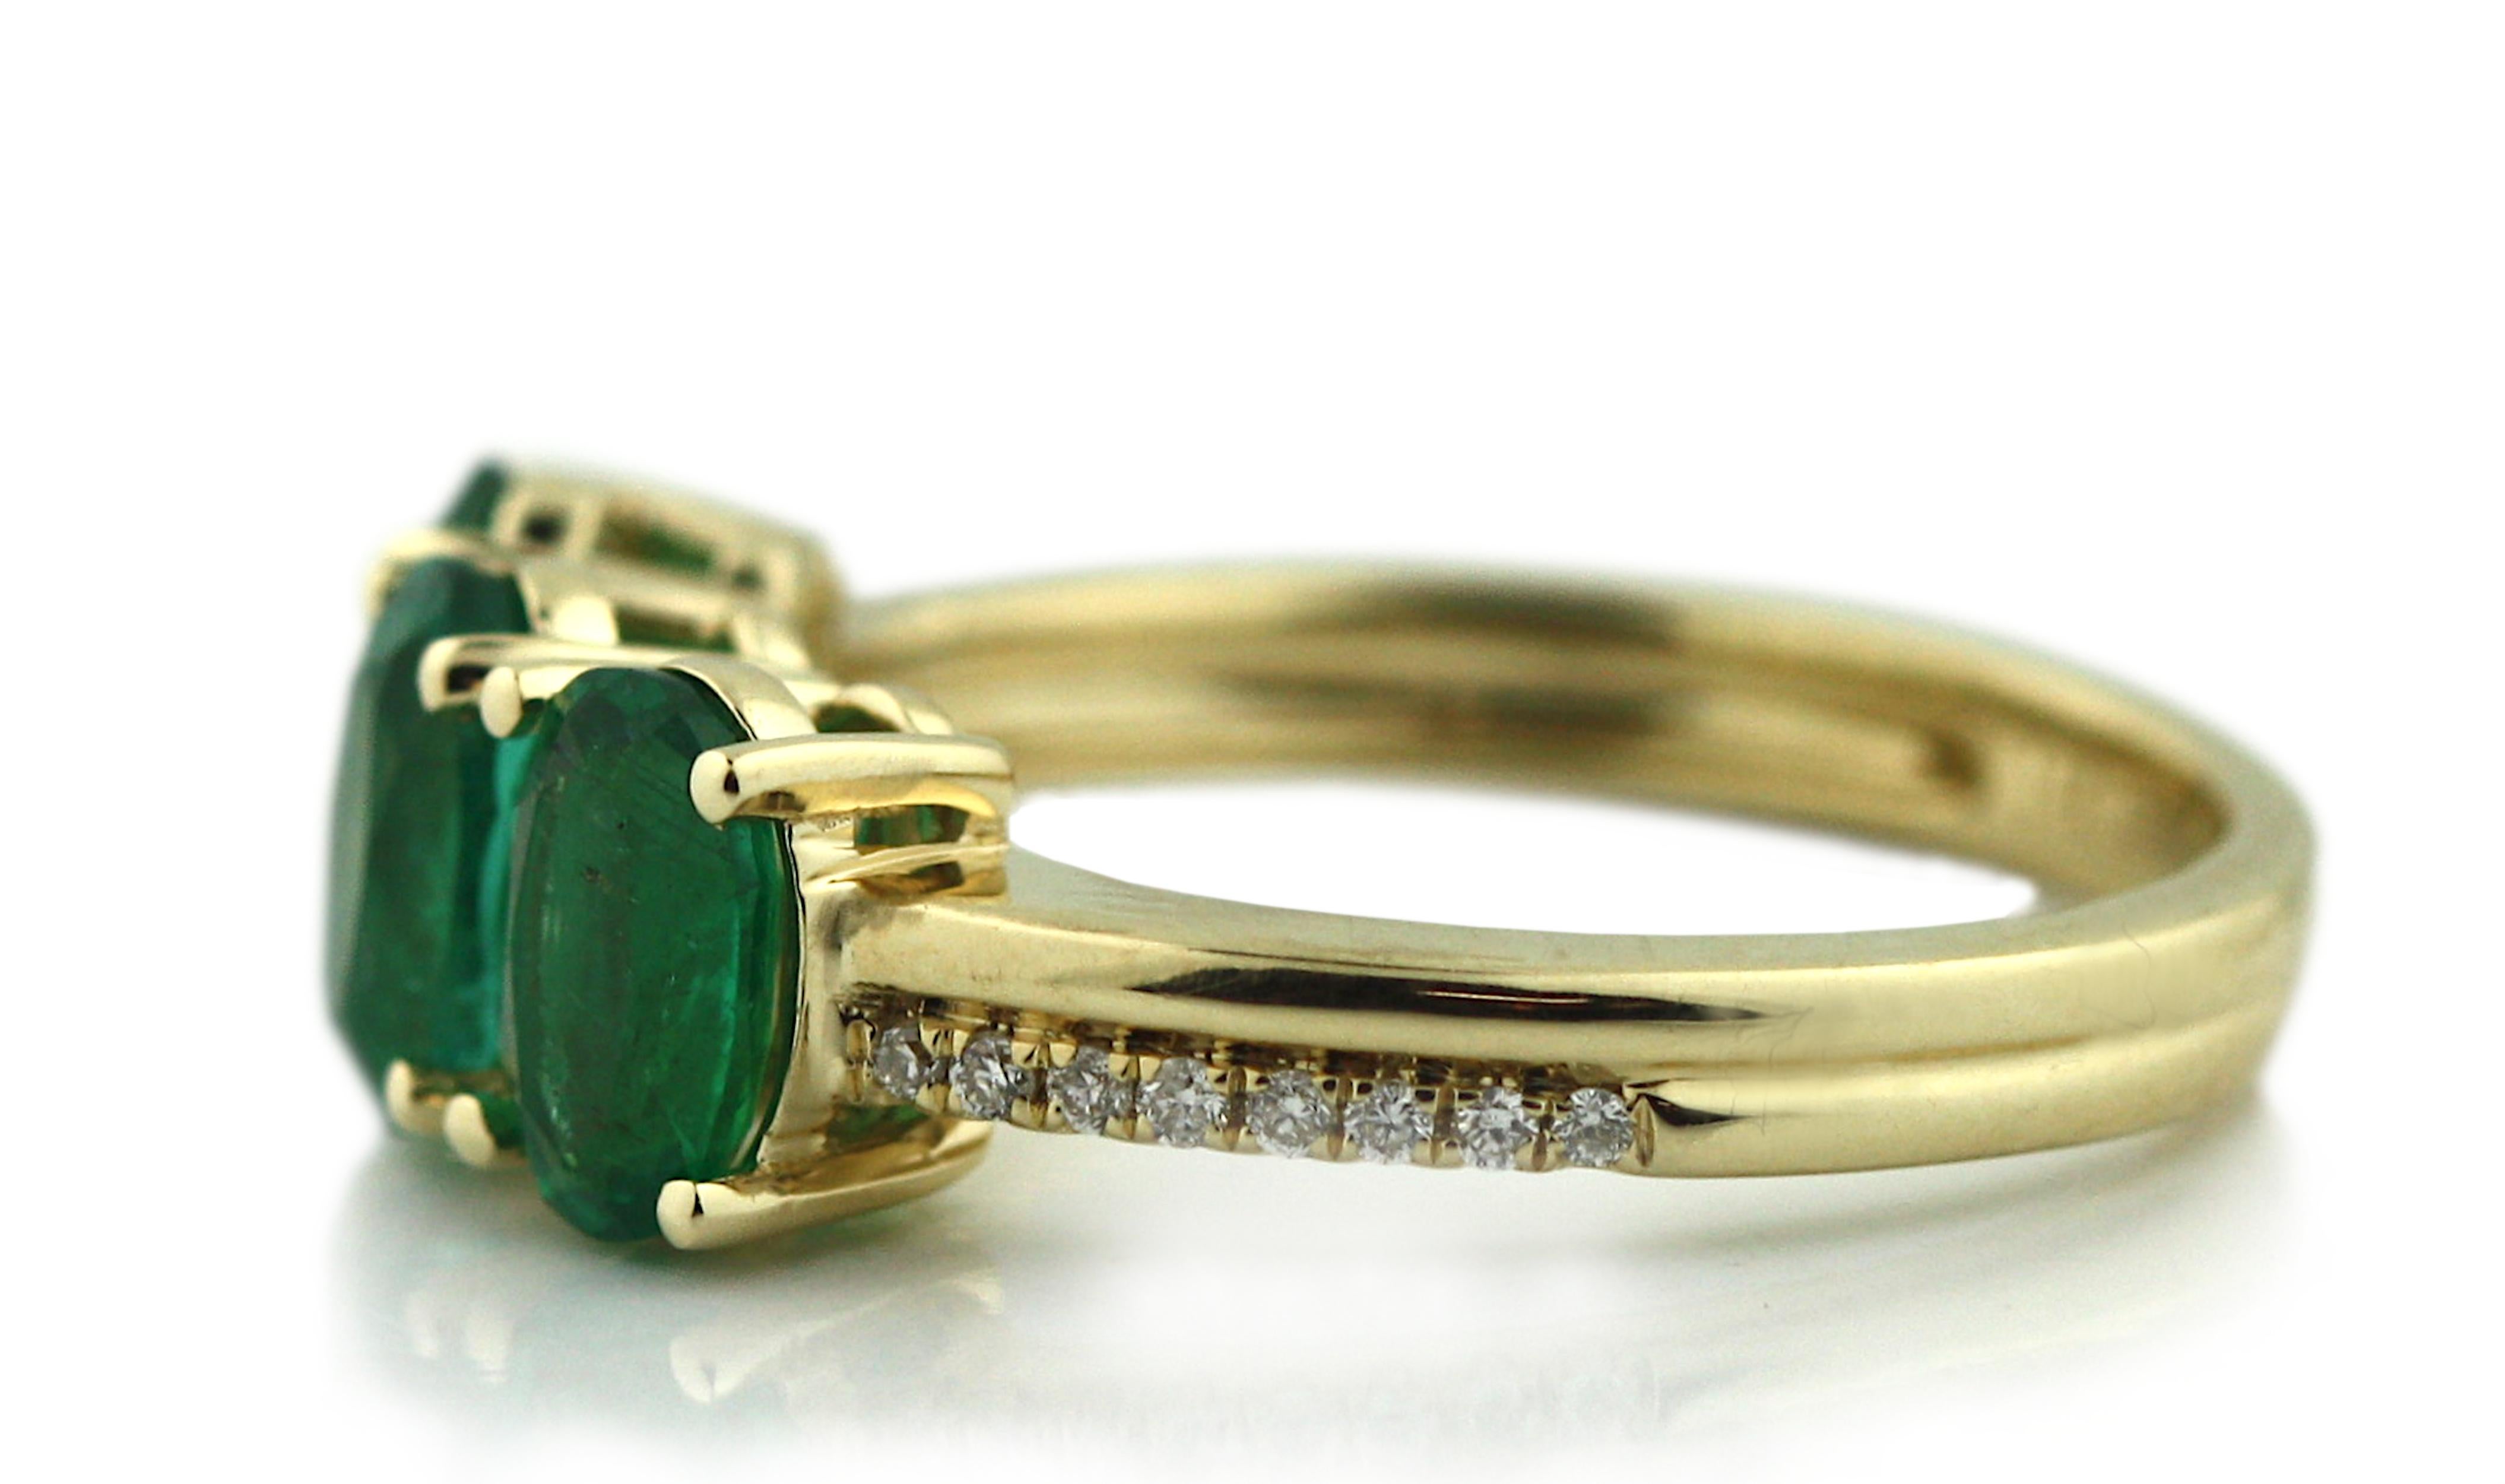 14K Yellow Gold Emerald and Diamond Ring 
Composed of three oval, brilliant cut Emeralds 
weighing 2.16 cts., measuring 6.98 x 4.91 x 2.99 mm to 7.06 x 5.0 x 3.90 mm
within a surround of sixteen diamonds